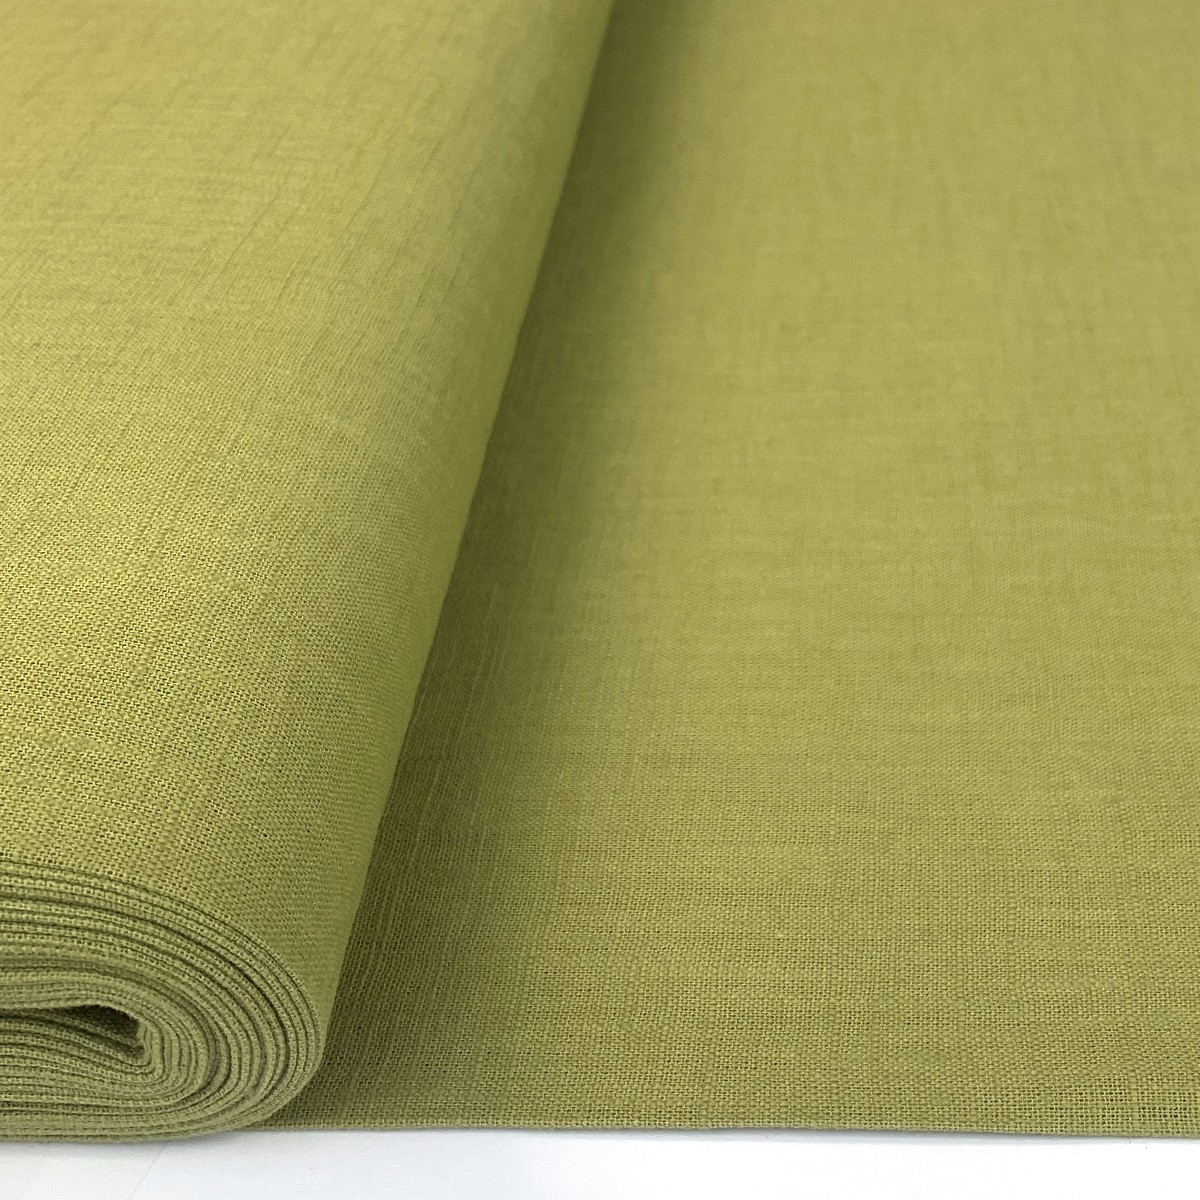 Pure Linen - Chartreuse - 100% Plain Dyed Linen Suiting Fabric - CLose Up Roll Fabric Photo 